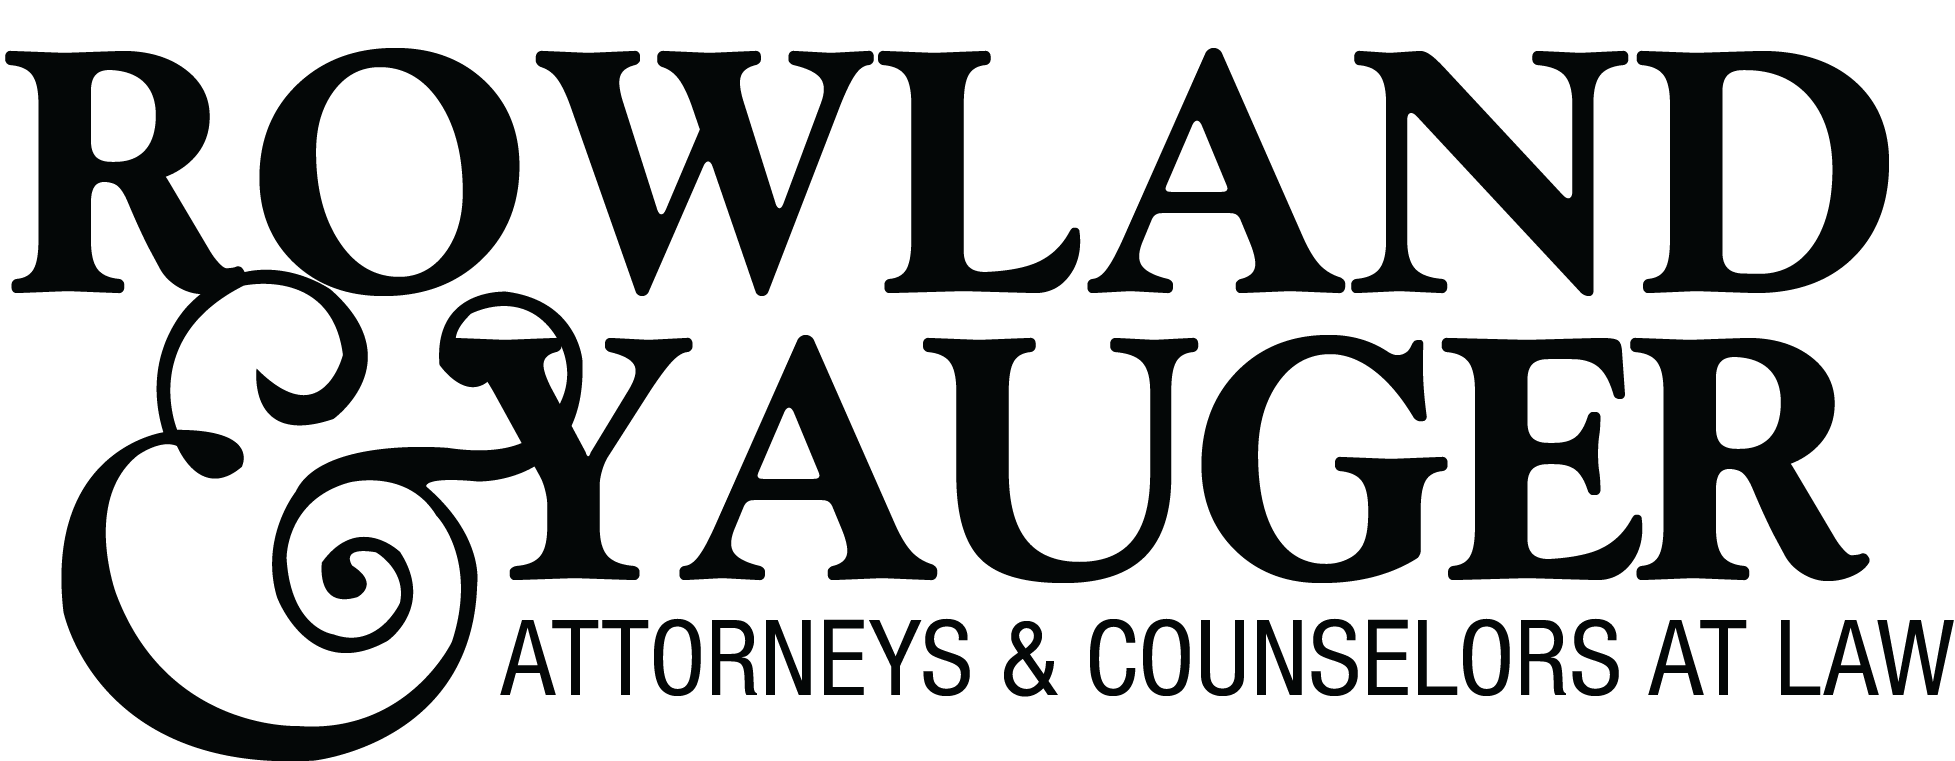 Rowland & Yauger Attorneys & Counselors At Law